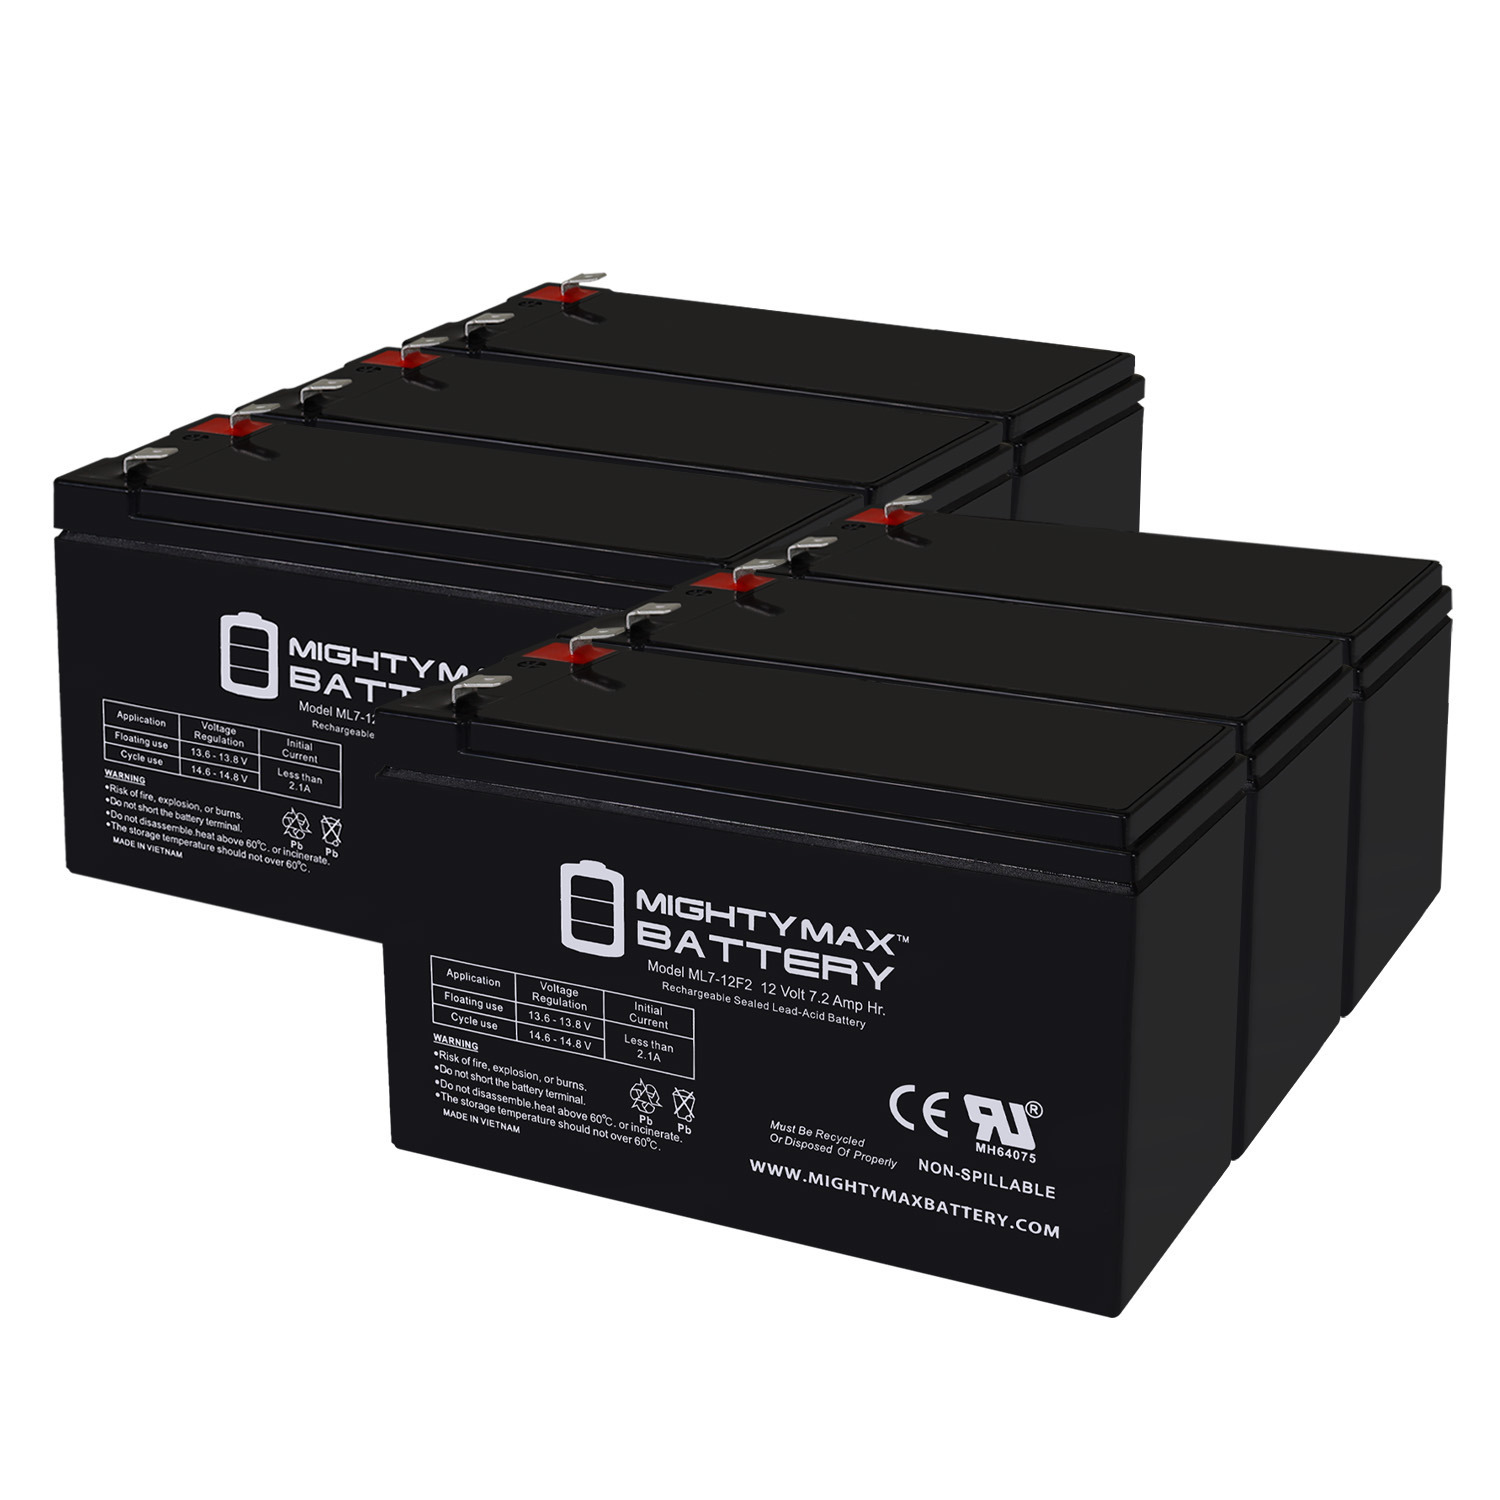 12V 7Ah F2 Replacement Battery for PowerWare 05146074-6591 - 6 Pack